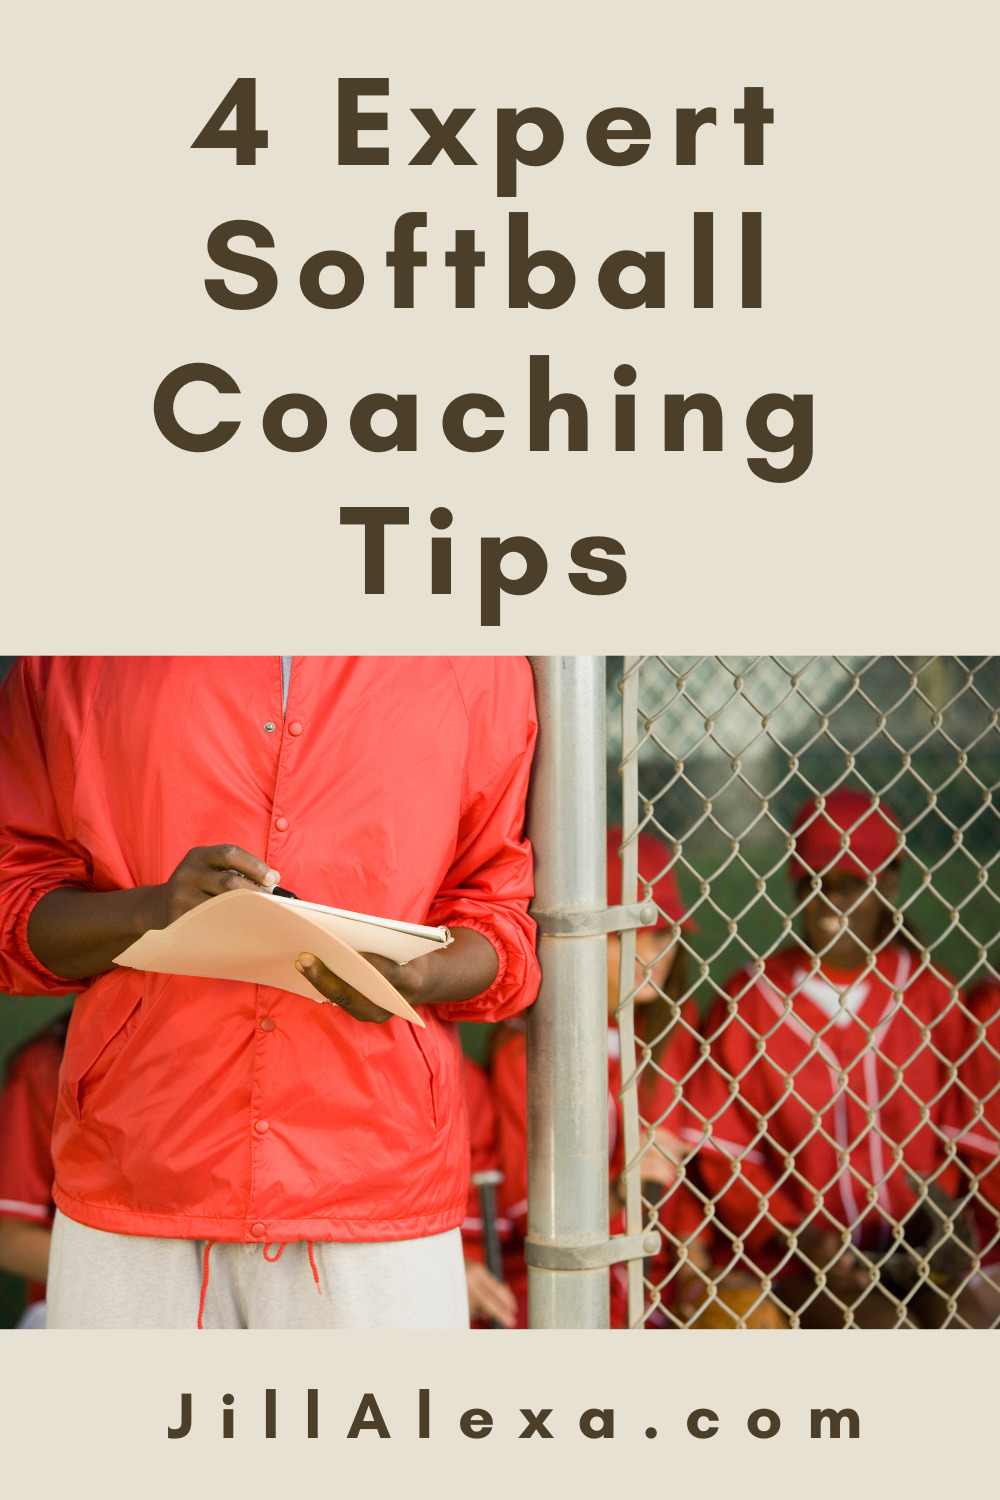 Are you finding being a softball coach more difficult than you expected? Use these four expert softball coaching tips so you'll have as much fun as the players.